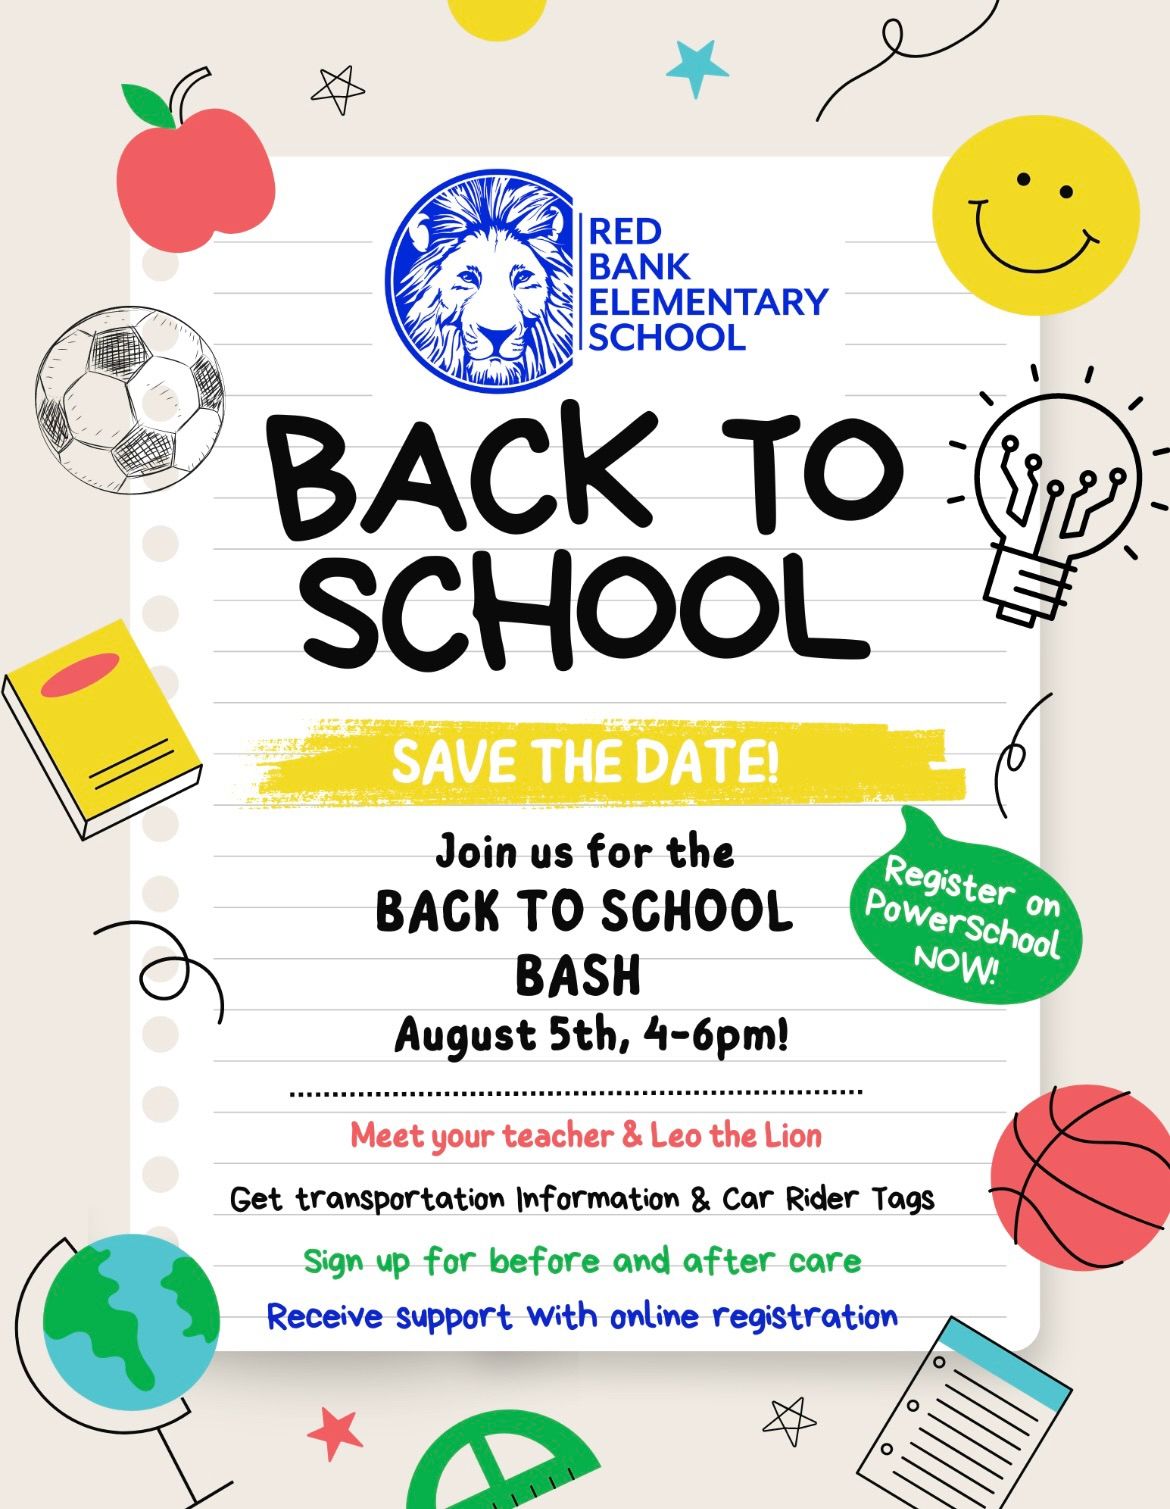 Back to School Bash and Registration